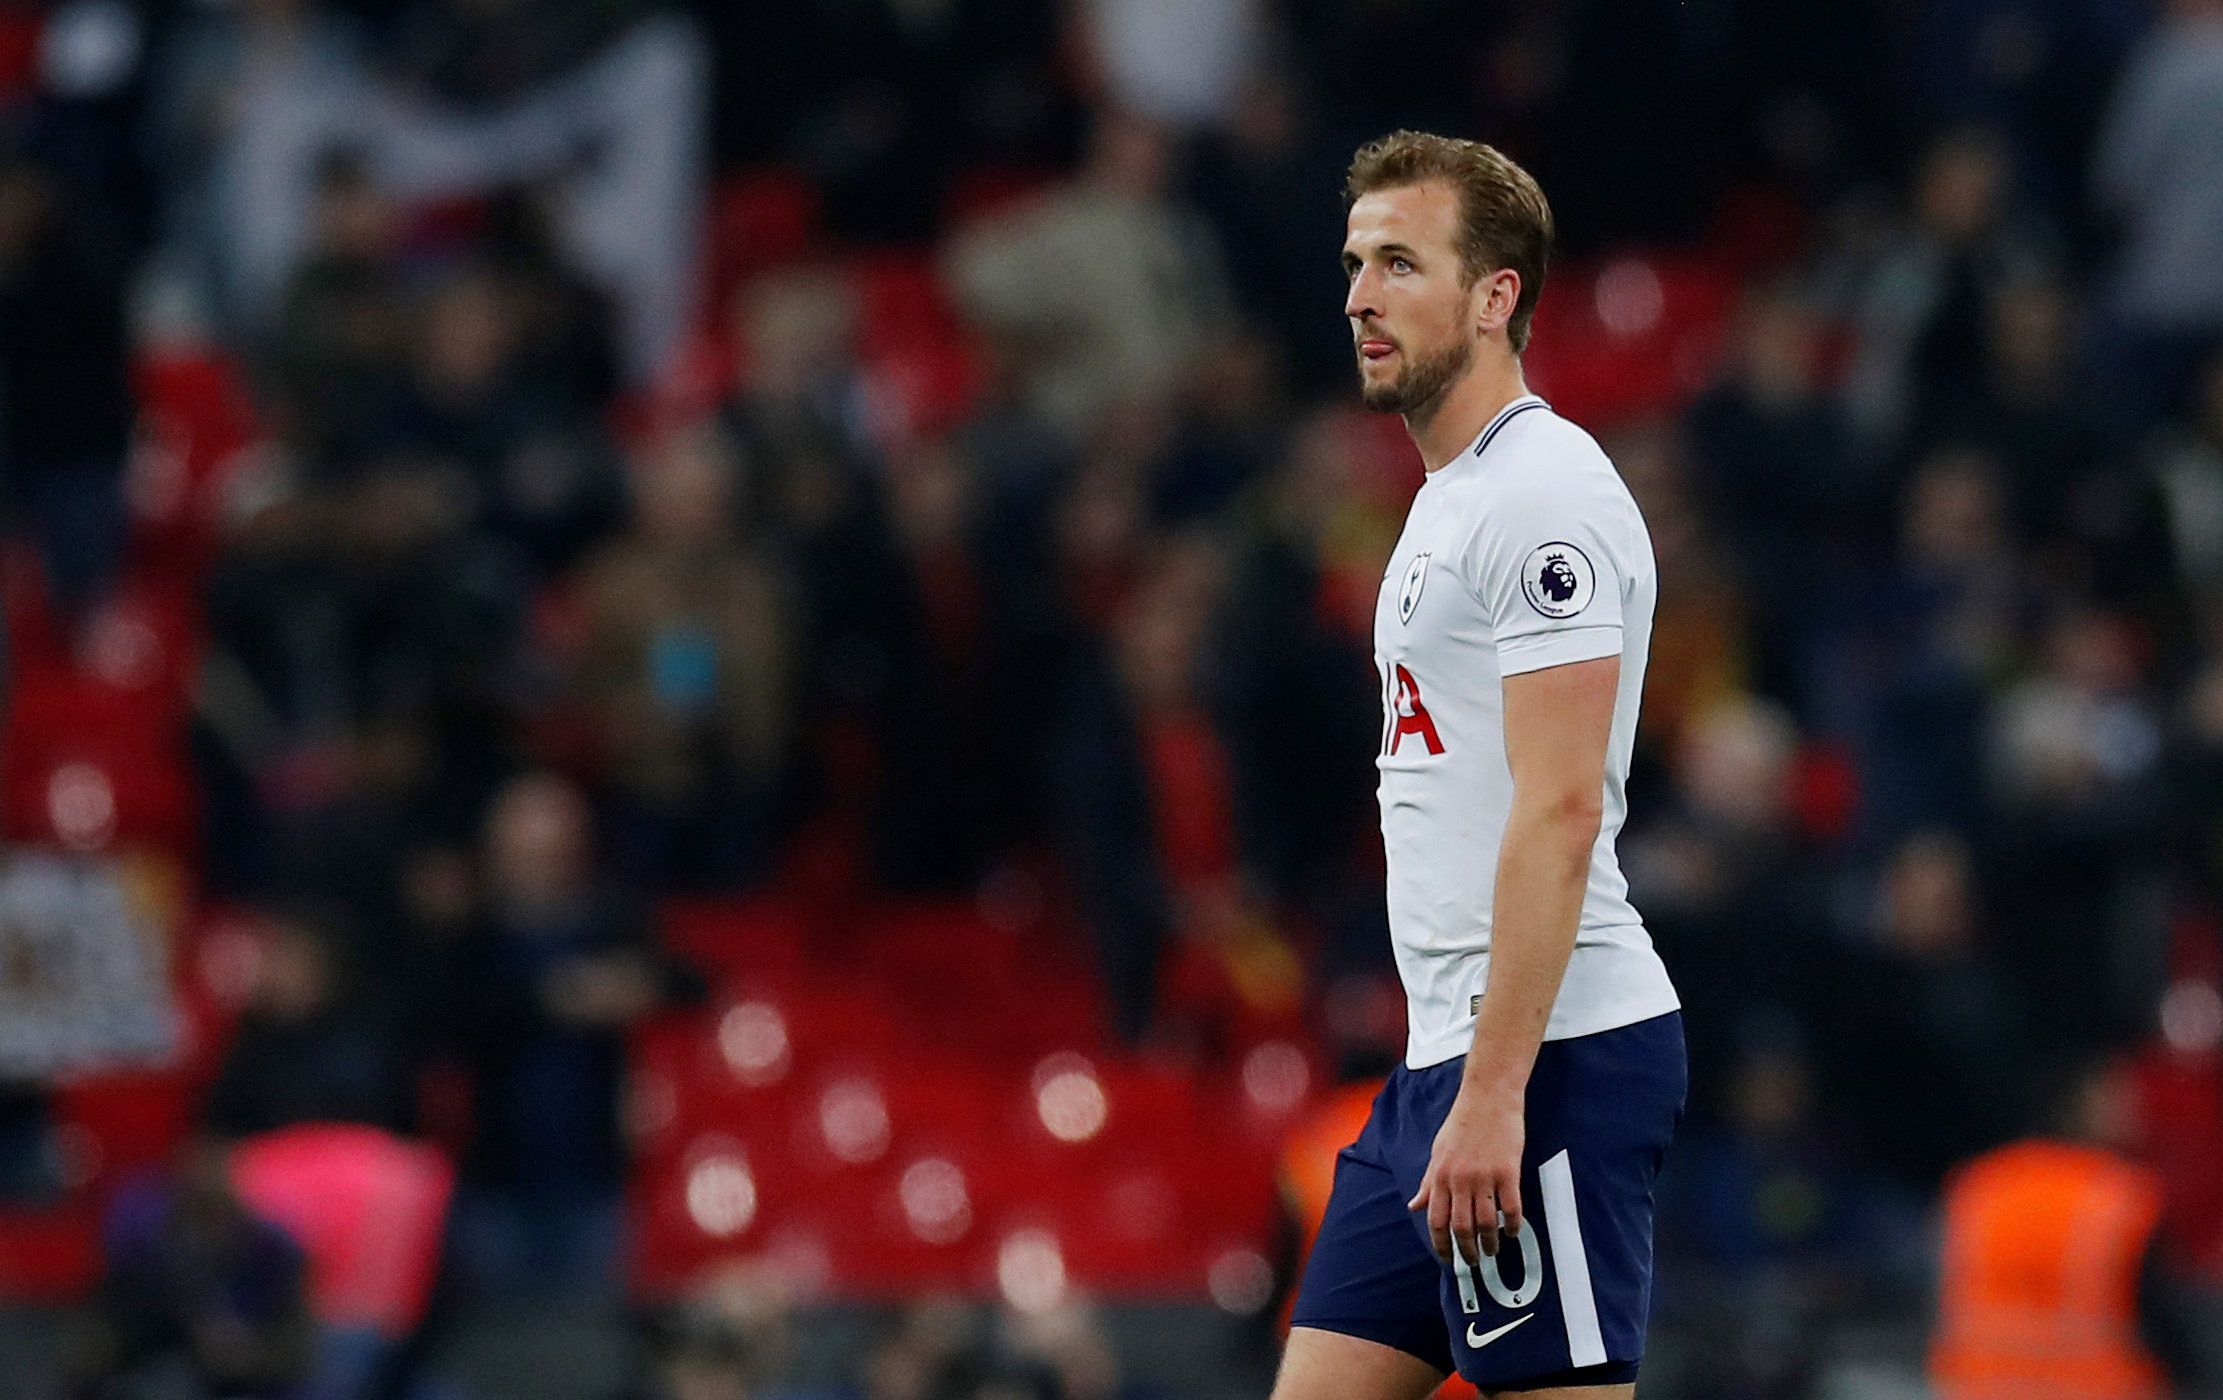 Soccer Football - Premier League - Tottenham Hotspur vs Manchester City - Wembley Stadium, London, Britain - April 14, 2018   Tottenham's Harry Kane looks dejected after the match    Action Images via Reuters/Andrew Couldridge    EDITORIAL USE ONLY. No use with unauthorized audio, video, data, fixture lists, club/league logos or 